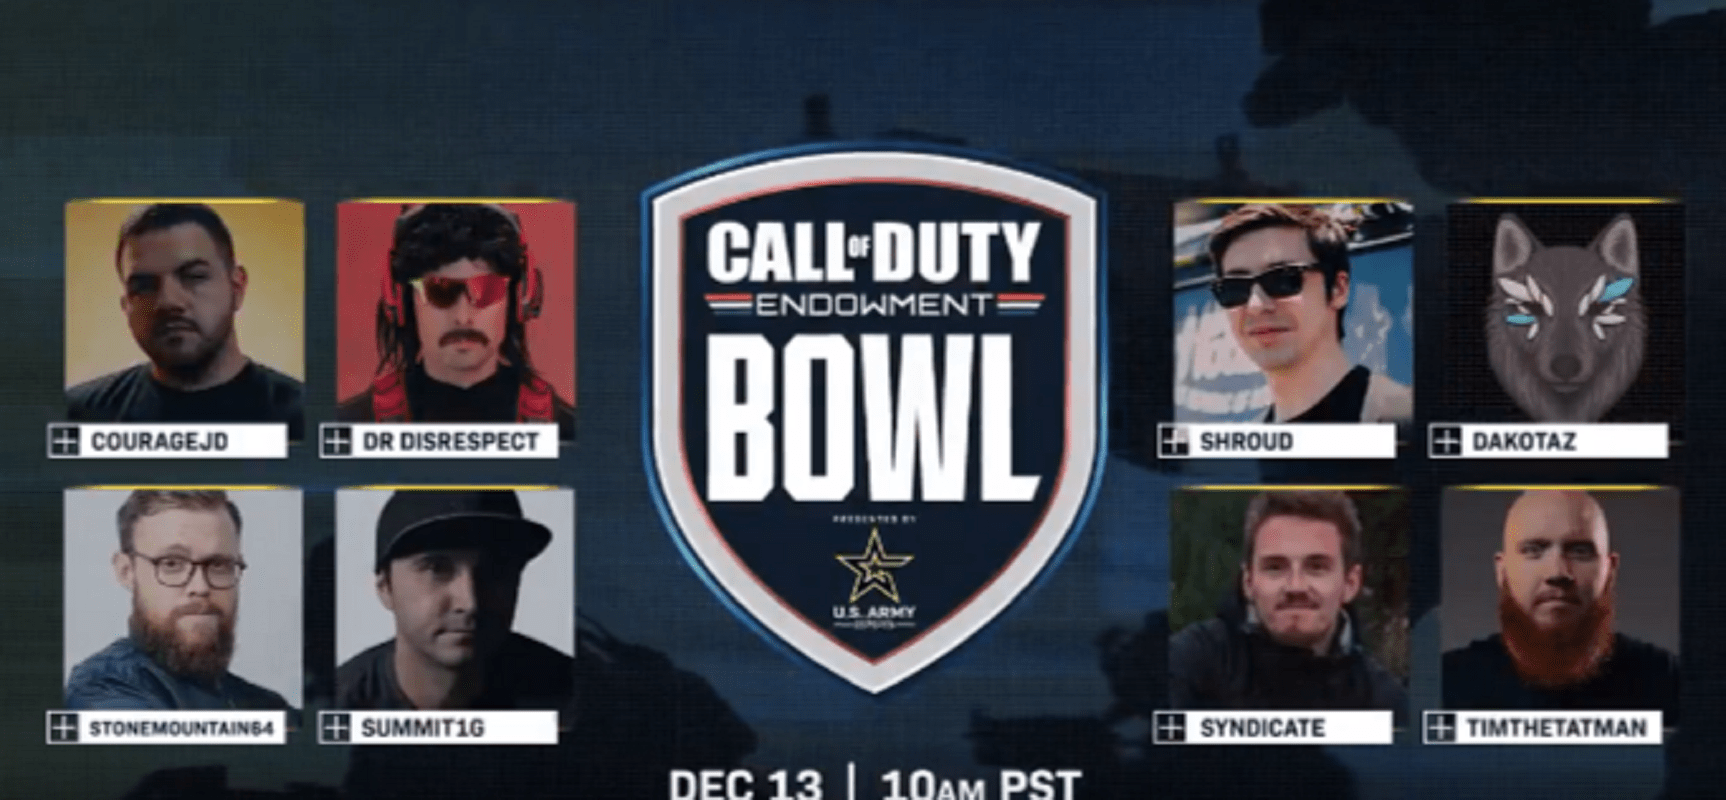 Eight Popular Streams Will Team Up With Veterans In The First Ever Call Of Duty Endowment Bowl